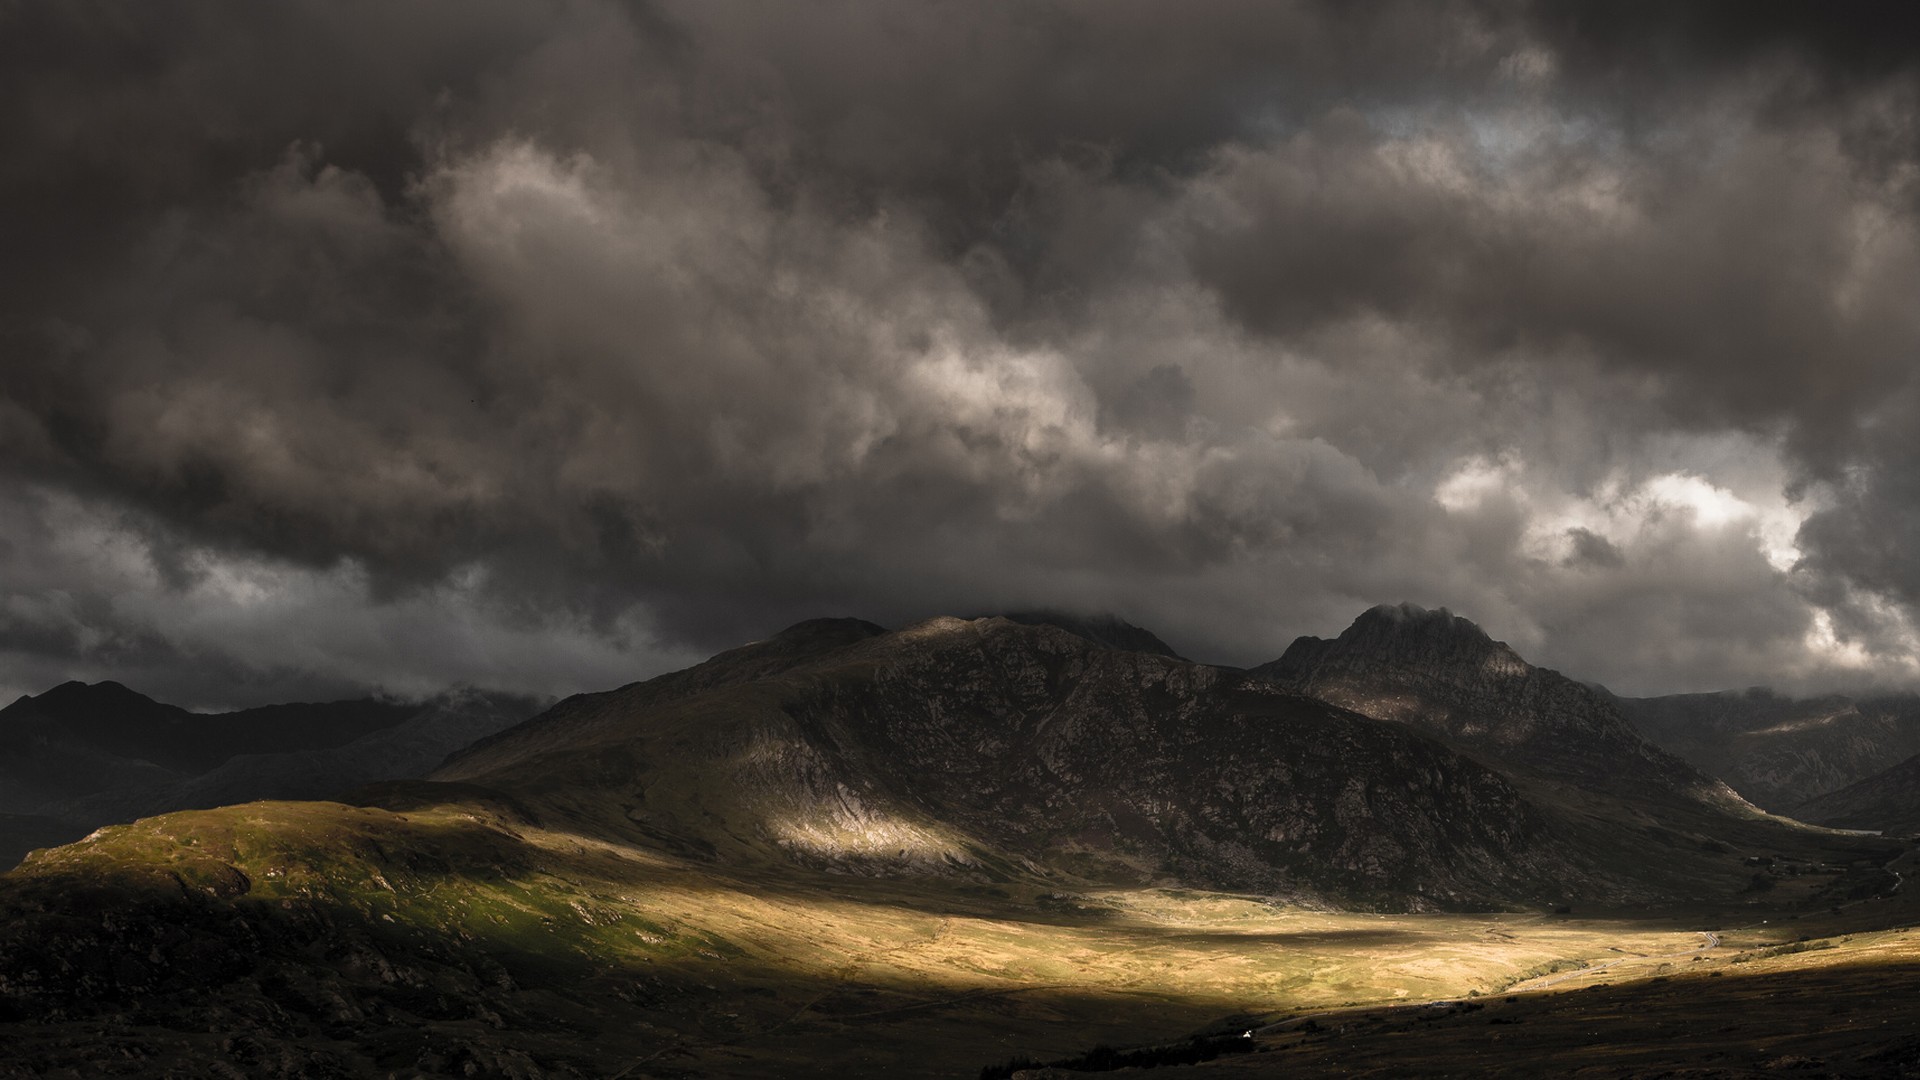 Dark clouds over the mountains